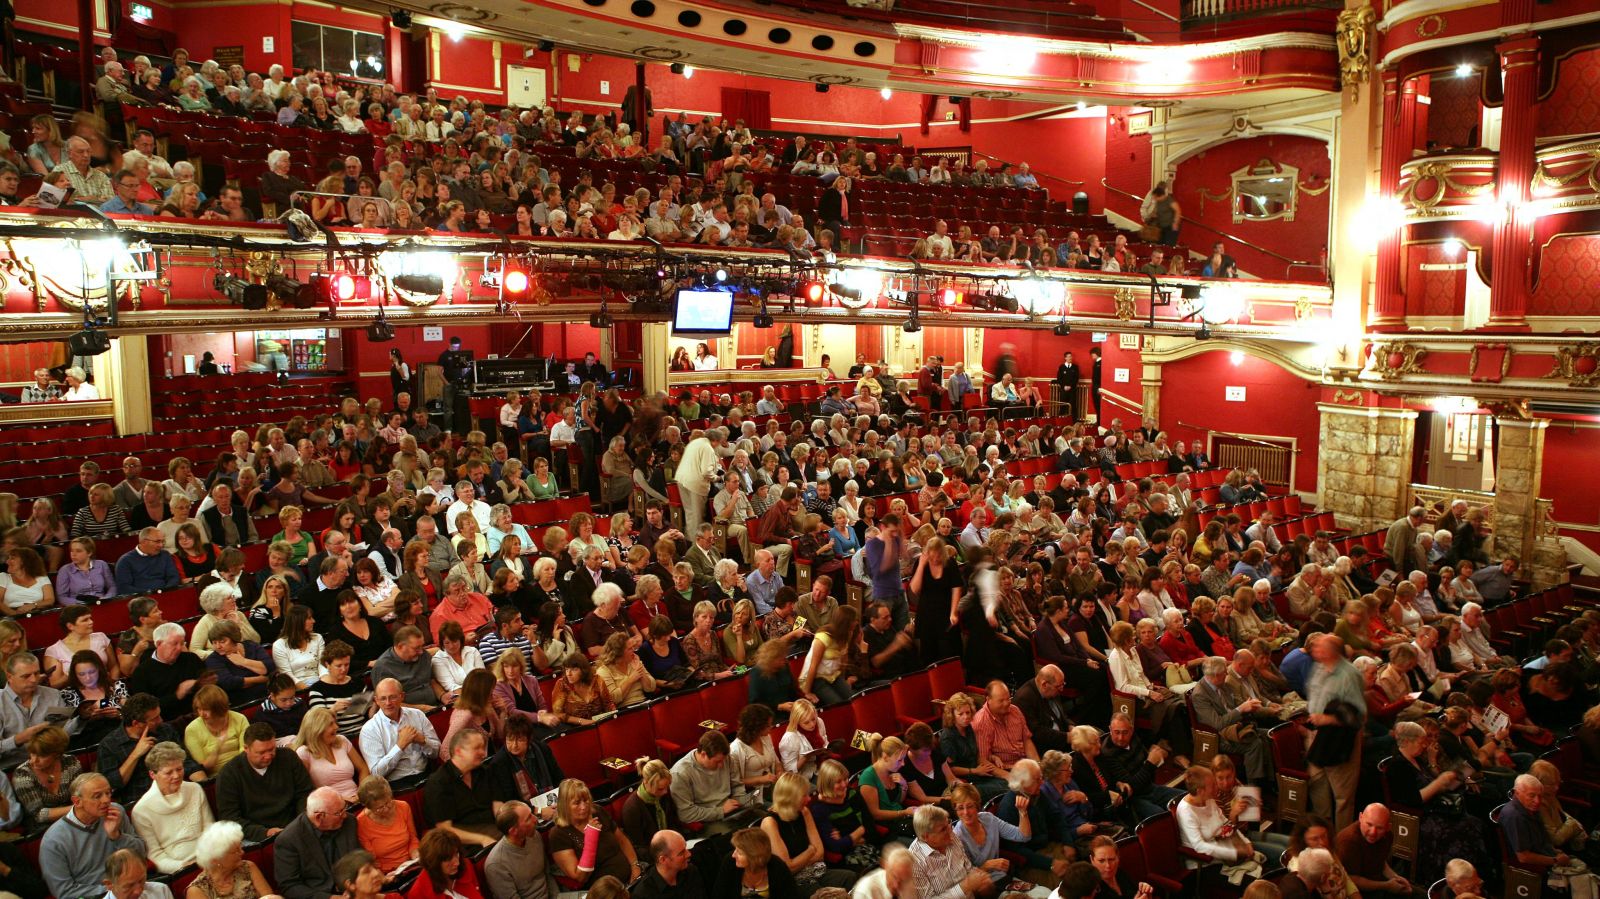 Discover what goes on behind the scenes at the Bristol Hippodrome with a guided tour